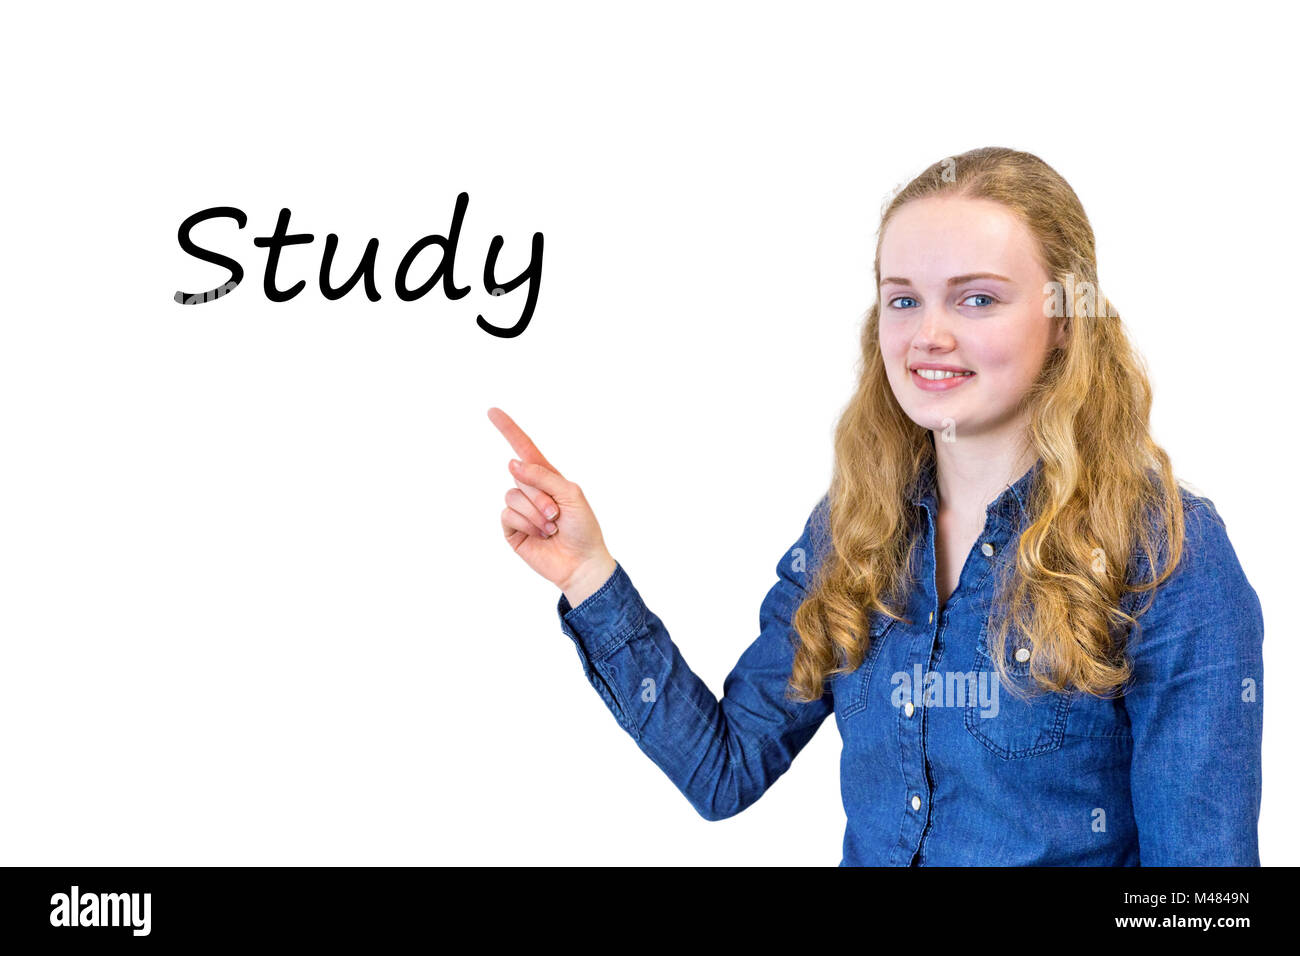 Dutch teenage girl pointing at word Study on white board Stock Photo